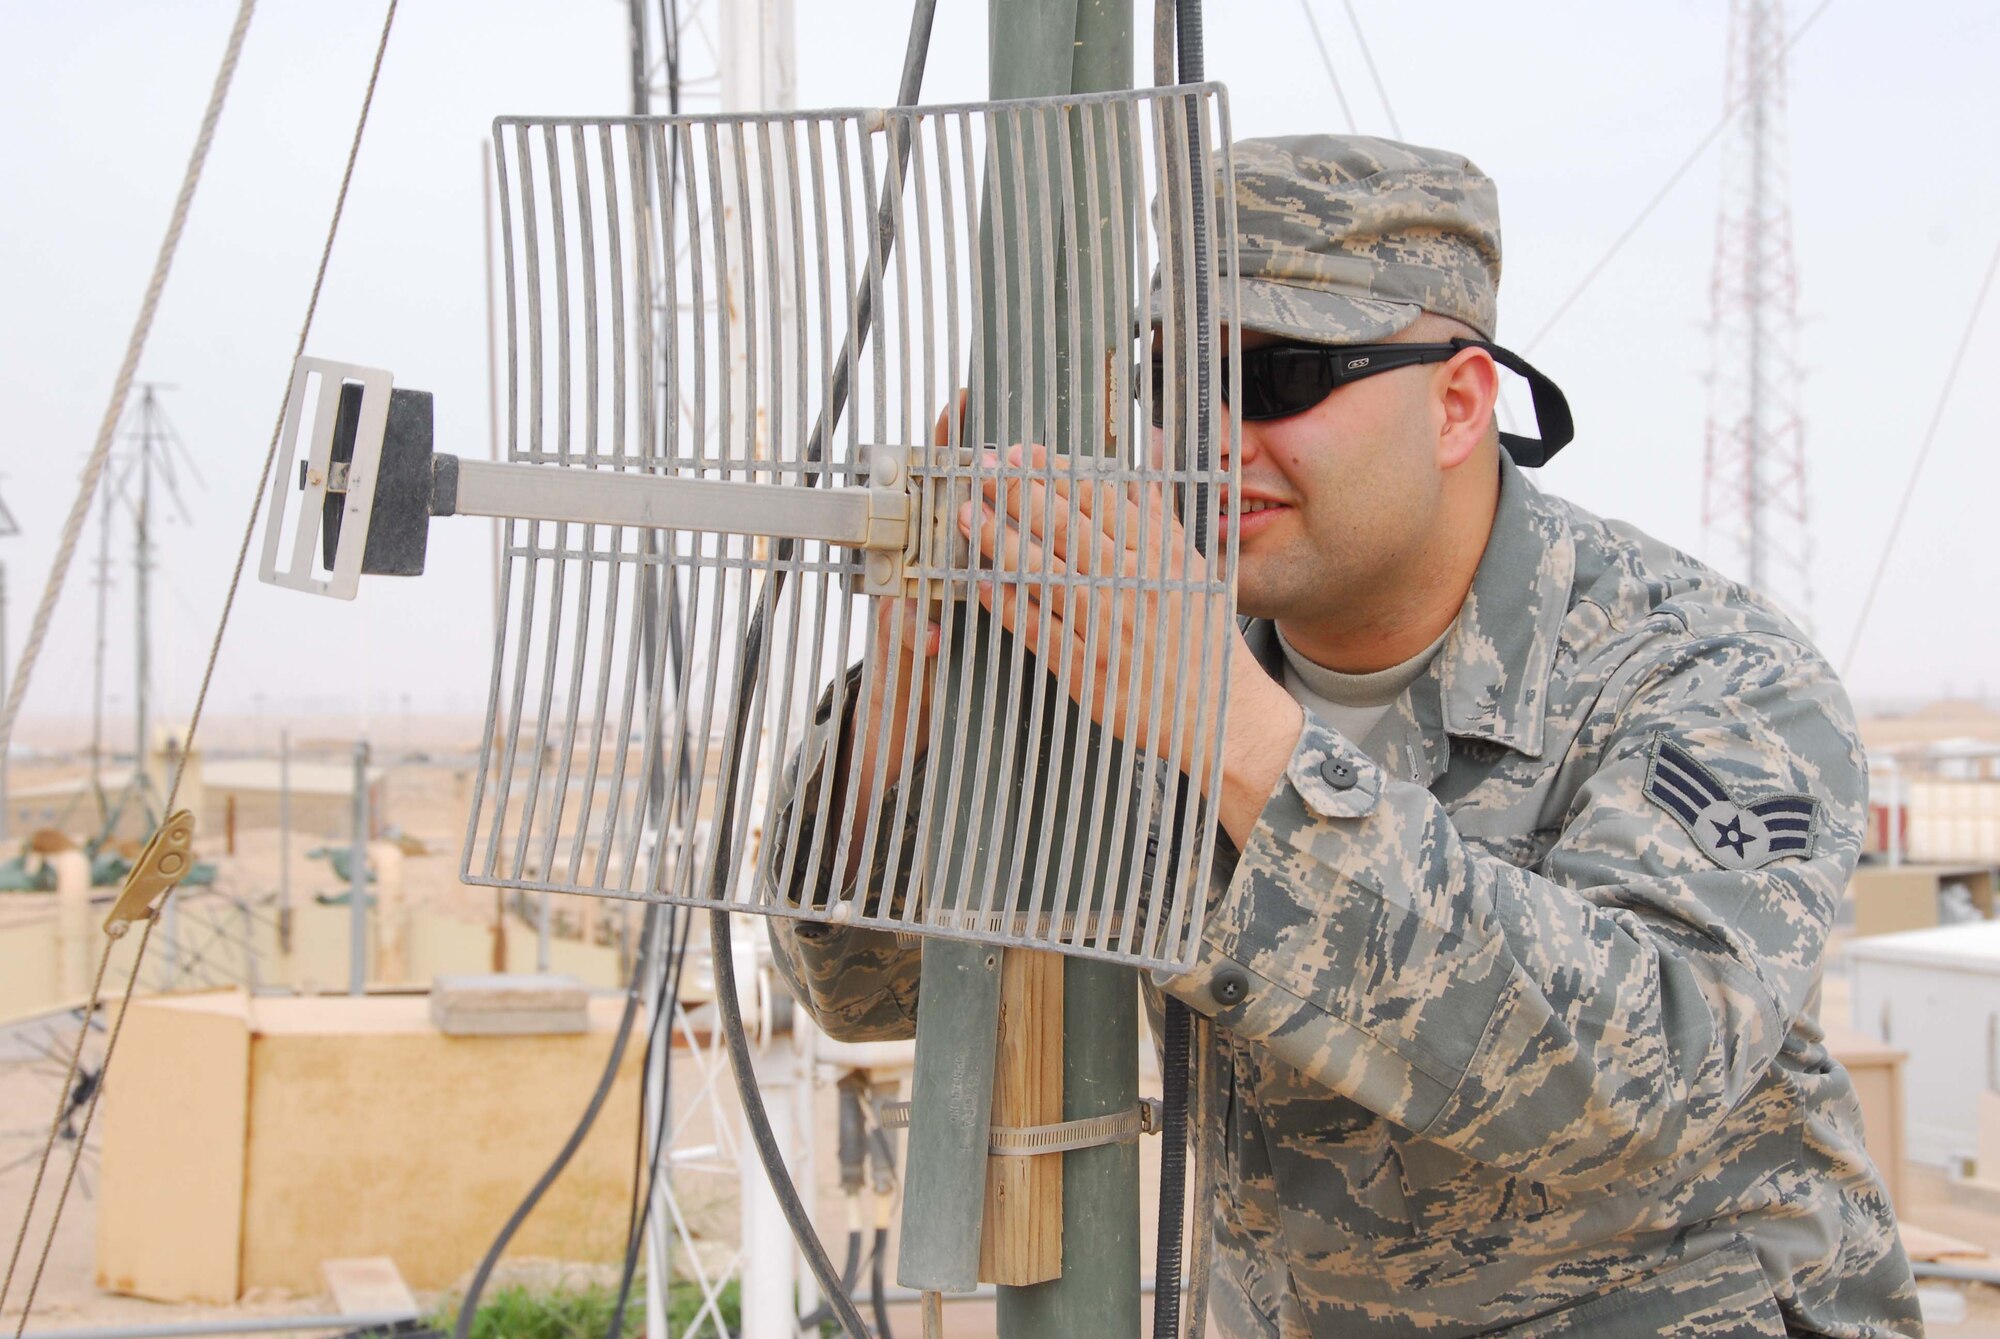 SOUTHWEST ASIA -- Senior Airman Stephon Westfall, 386th Expeditionary Communications Squadron, aligns a Line of Sight antenna at an air base in Southwest Asia, Feb. 26. After a sand or wind storm, the LOS antenna must be realigned to maintain an open connection with the receiver. Airman Westfall is currently deployed from the 141st Air Refueling Wing, an Air National Guard unit, at Fairchild Air Force Base, Wash., and is originally from Spokane, Wash. (U.S. Air Force photo/ Senior Airman Courtney Richardson)